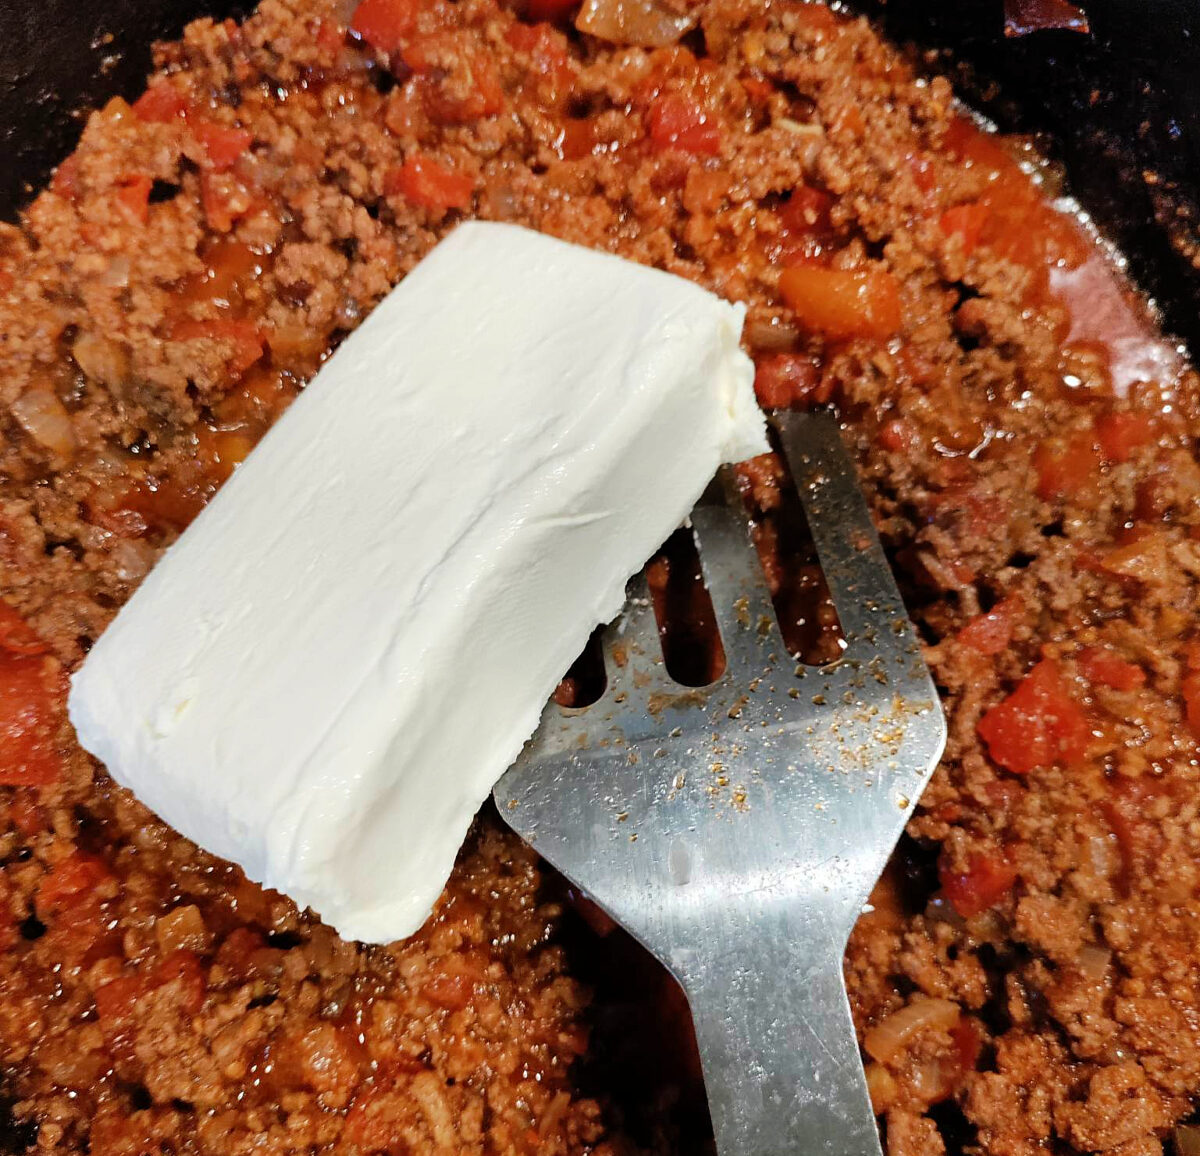 Mixing cream cheese in with the ground beef, Rotel, and onions for the Mexican Lasagna recipe